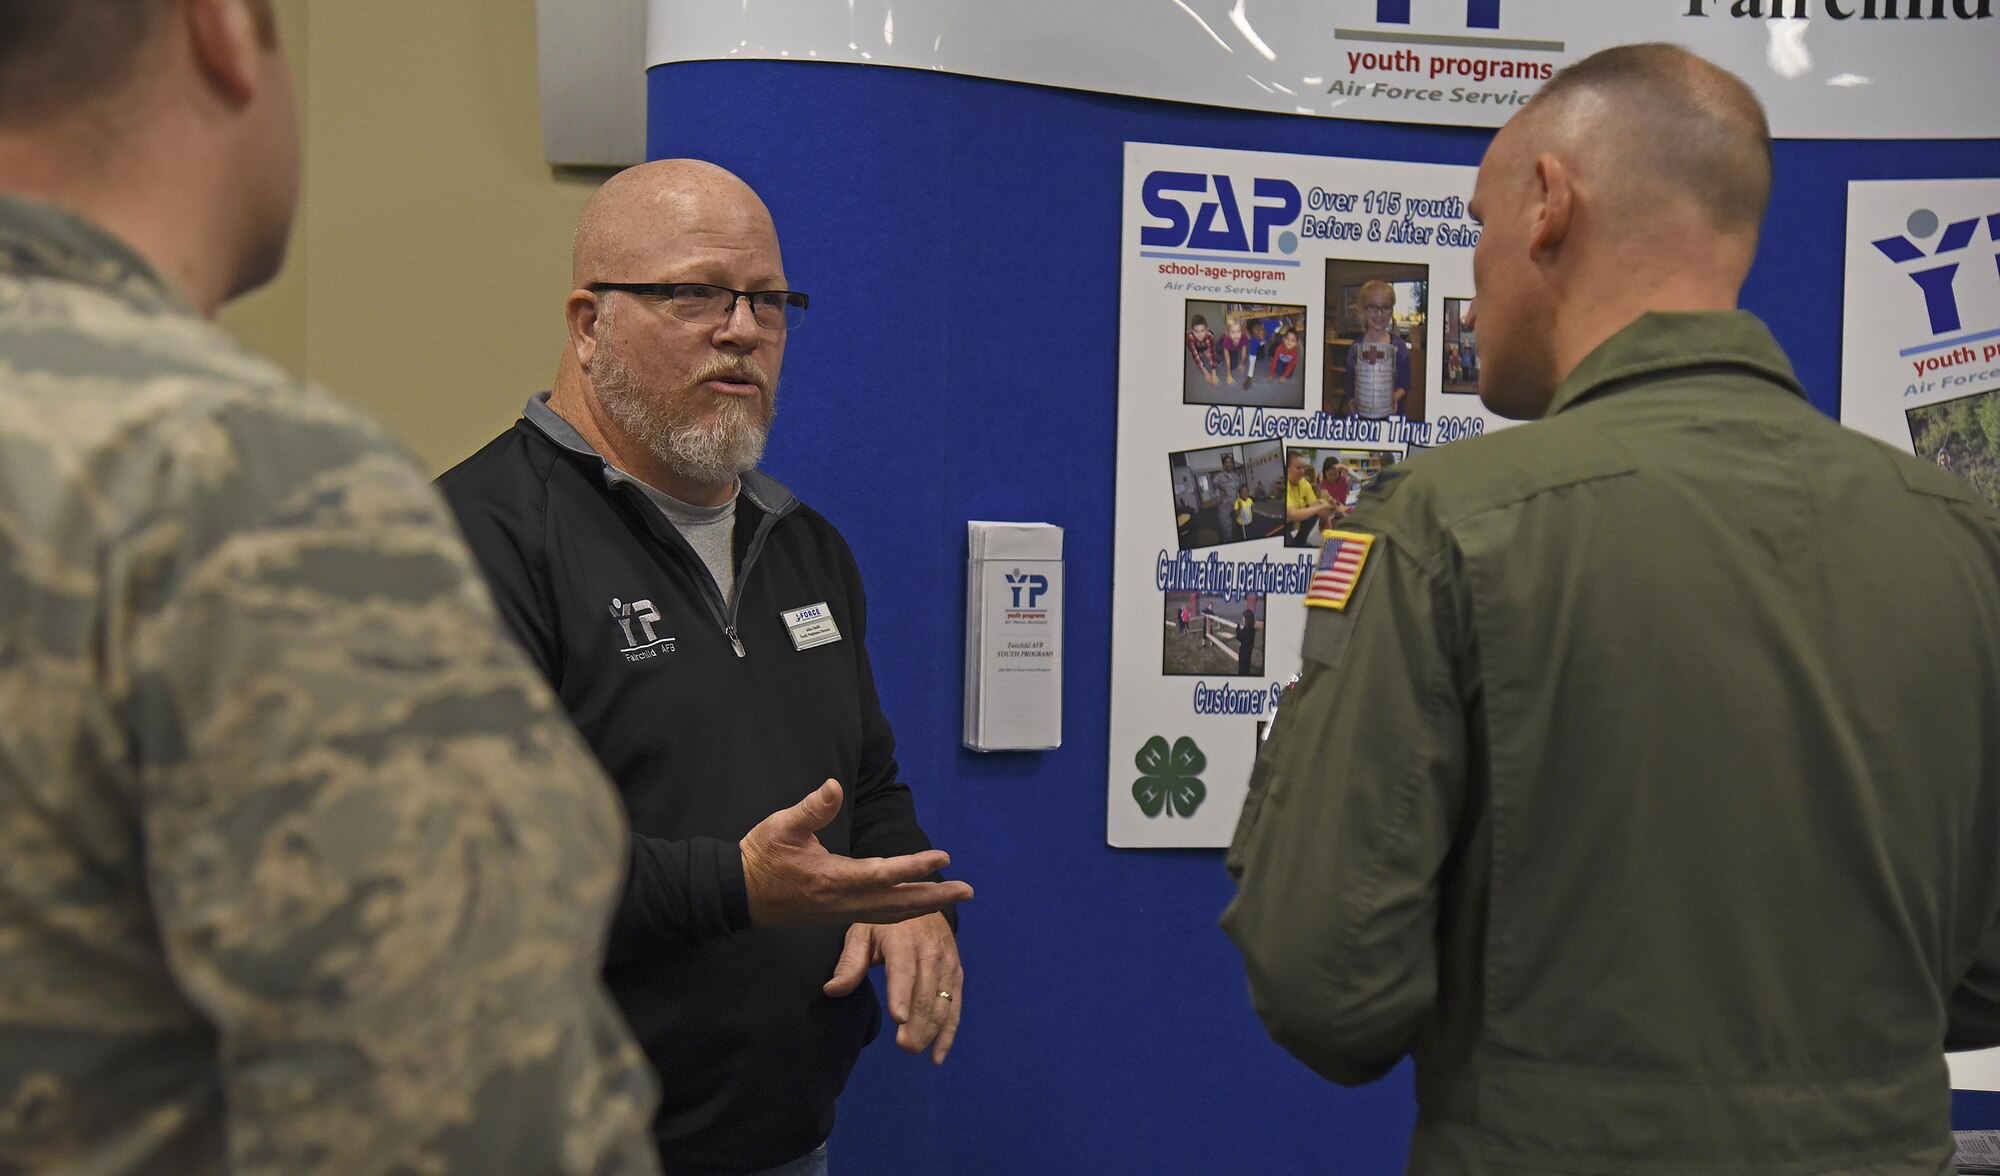 John Smith, 92nd Force Support Squadron youth programs director, discusses the impact of Fairchild’s youth programs with Col. Ryan Samuelson, 92nd Air Refueling Wing commander, during the Combined Federal Campaign Charity Fair Oct. 7, 2016, at the Red Morgan Center. The fair hosted six charities from the local area to encourage participation regardless of the monetary contribution amount. (U.S. Air Force photo/Senior Airman Mackenzie Richardson)